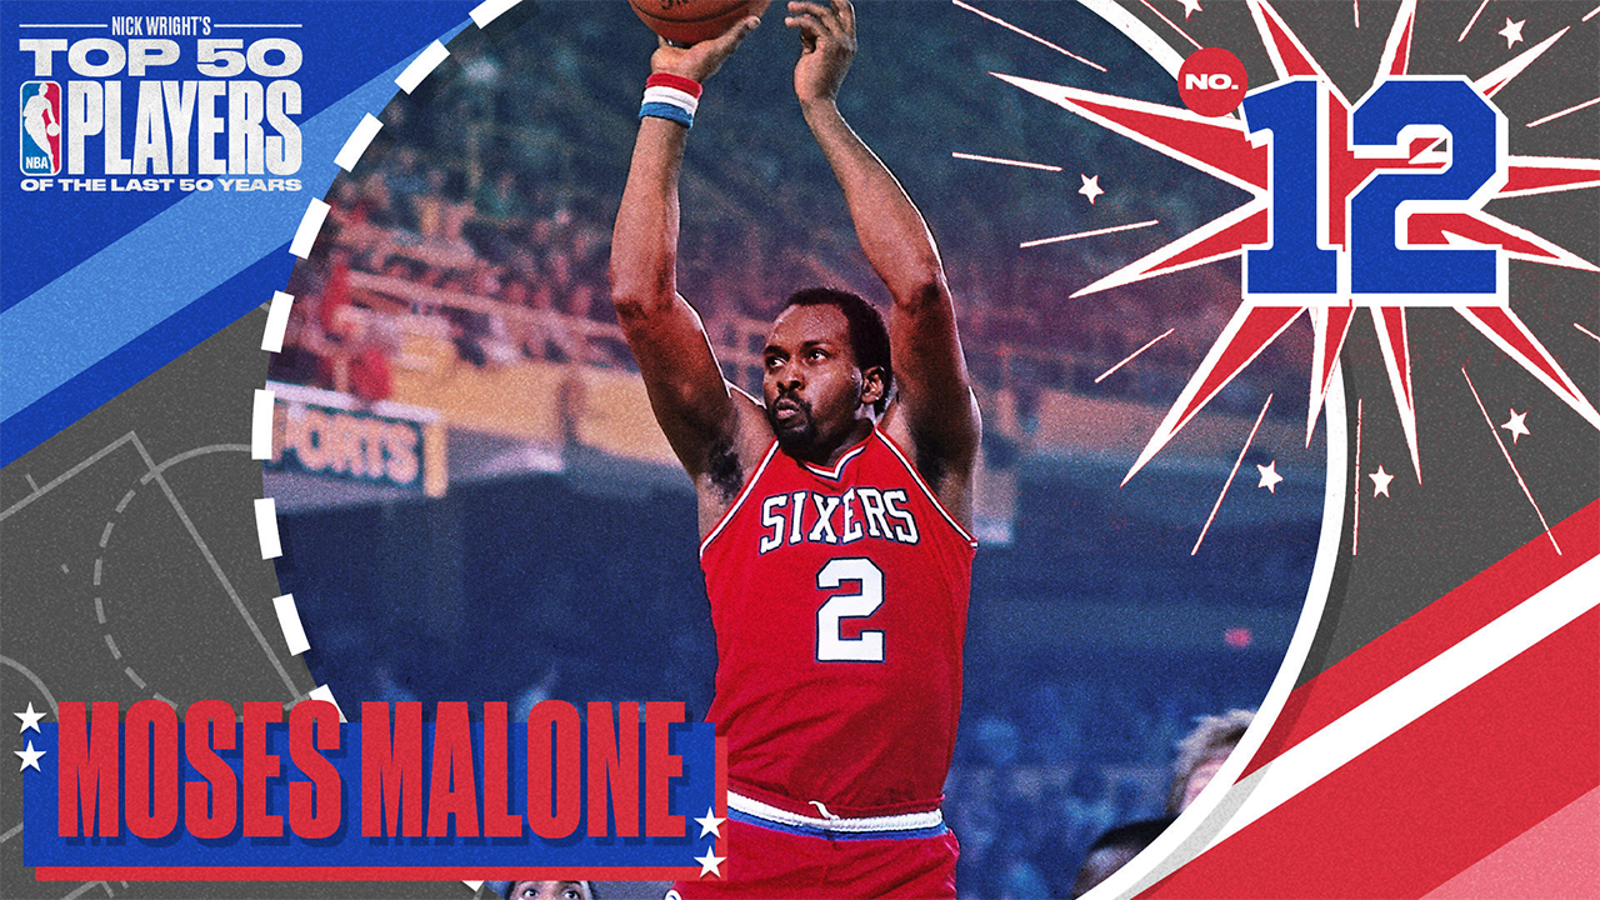 Moses Malone is No. 12 on Nick Wright's Top 50 Players of the Last 50 Years